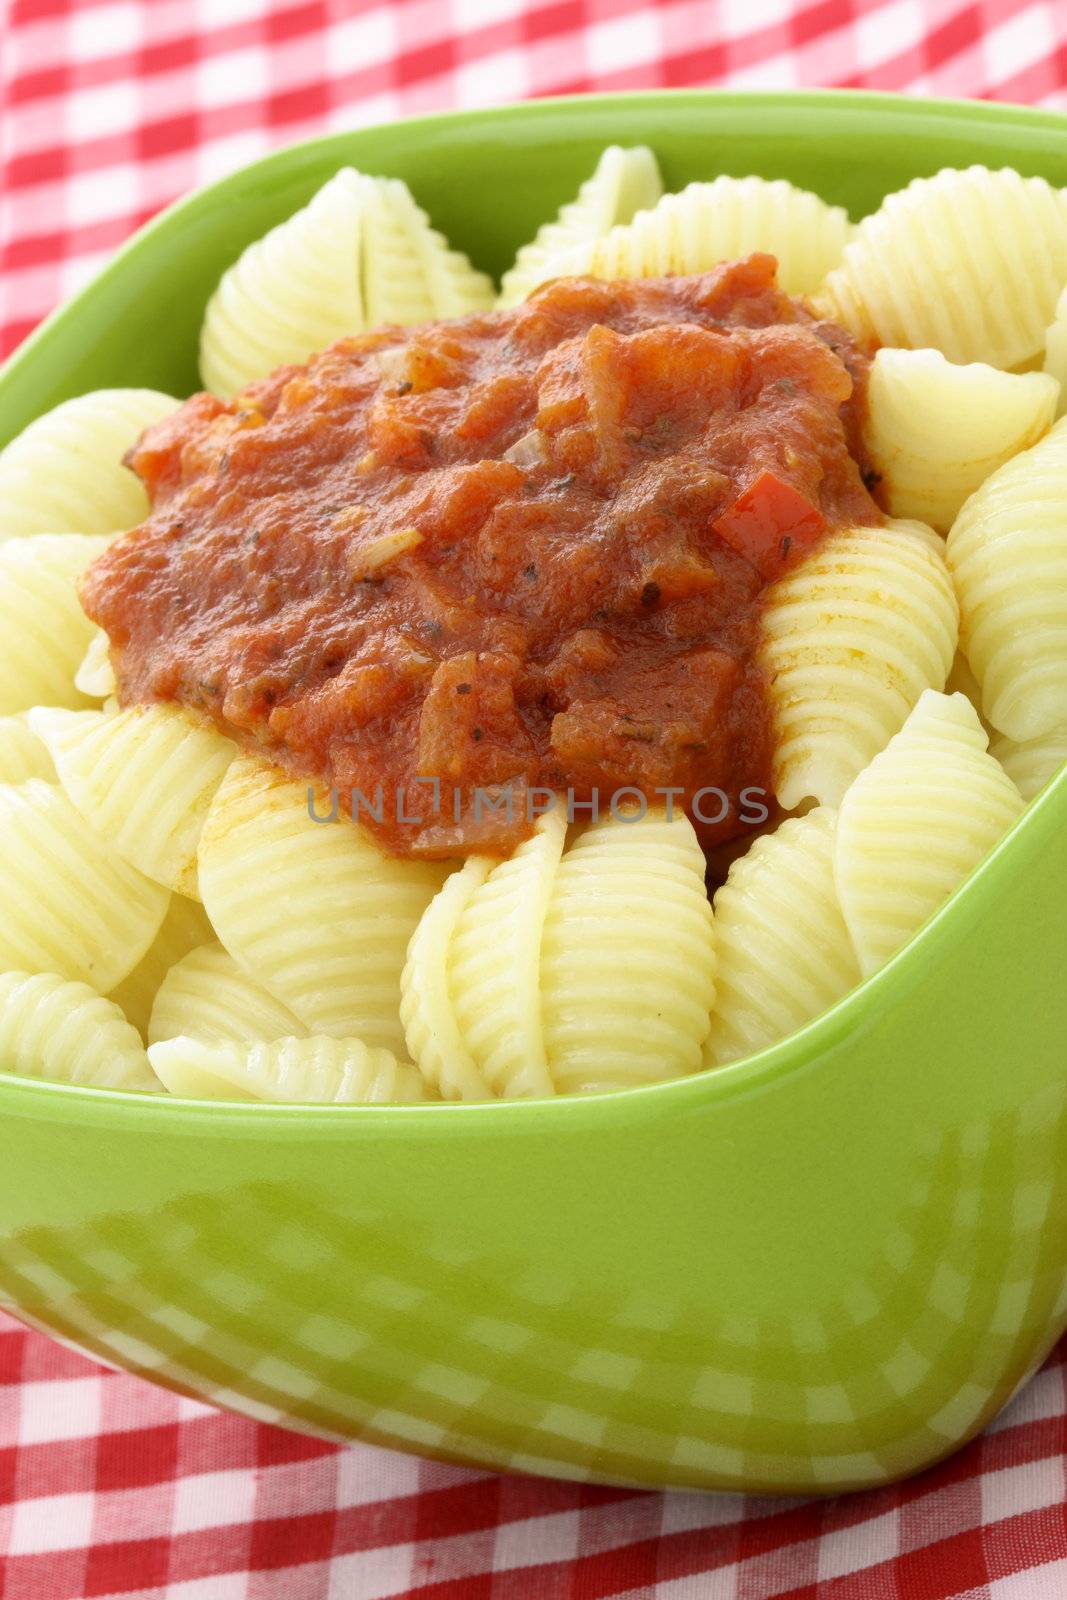 These italian pasta shells never fail to make a big impression, and the recipe is very easy and delicious served with marinara or meat sauces.